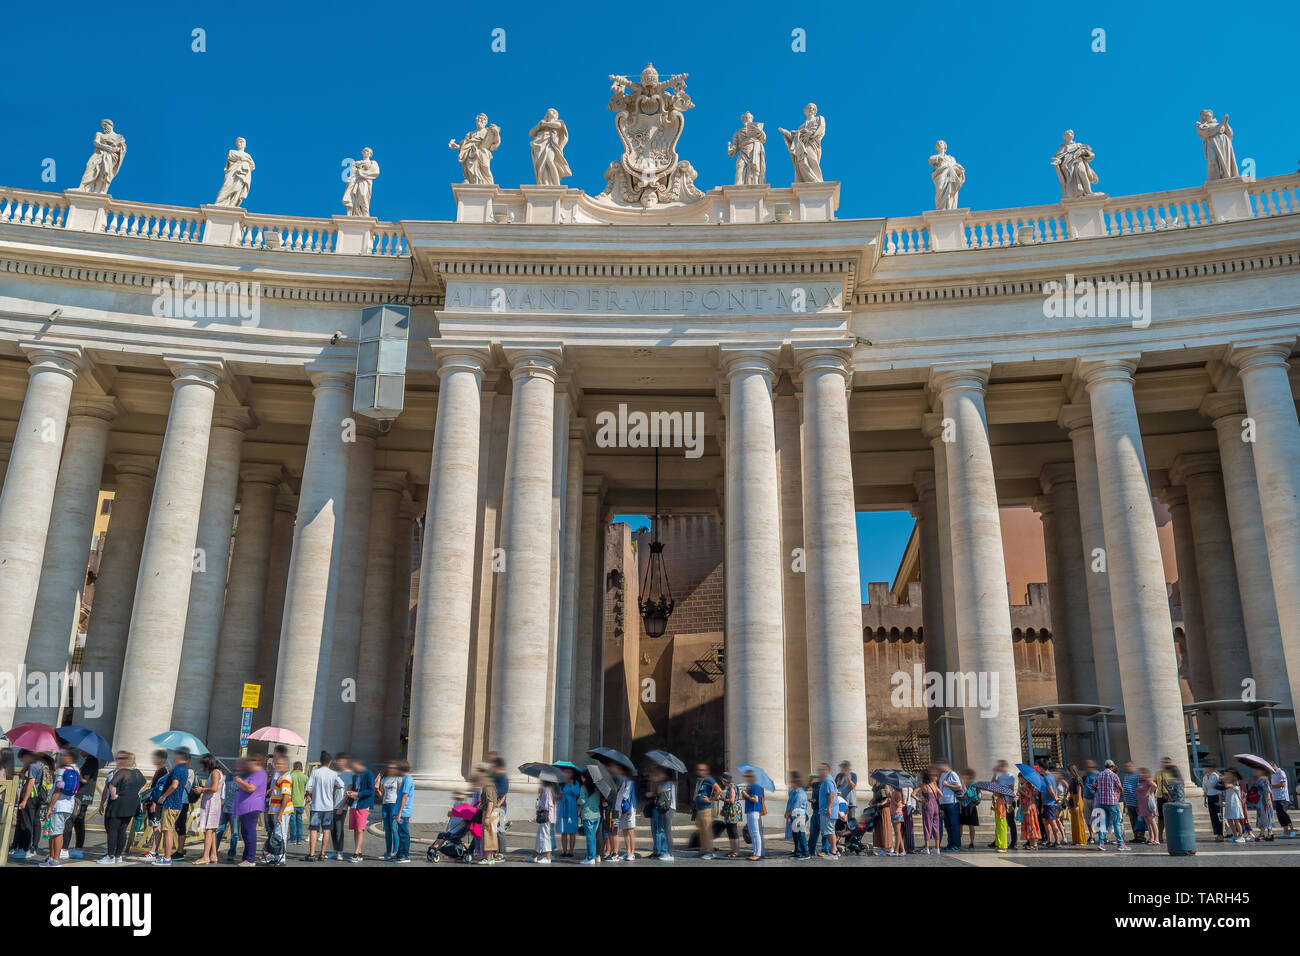 People and Doric Columns of St. Peter's Square in the Vatican Stock Photo